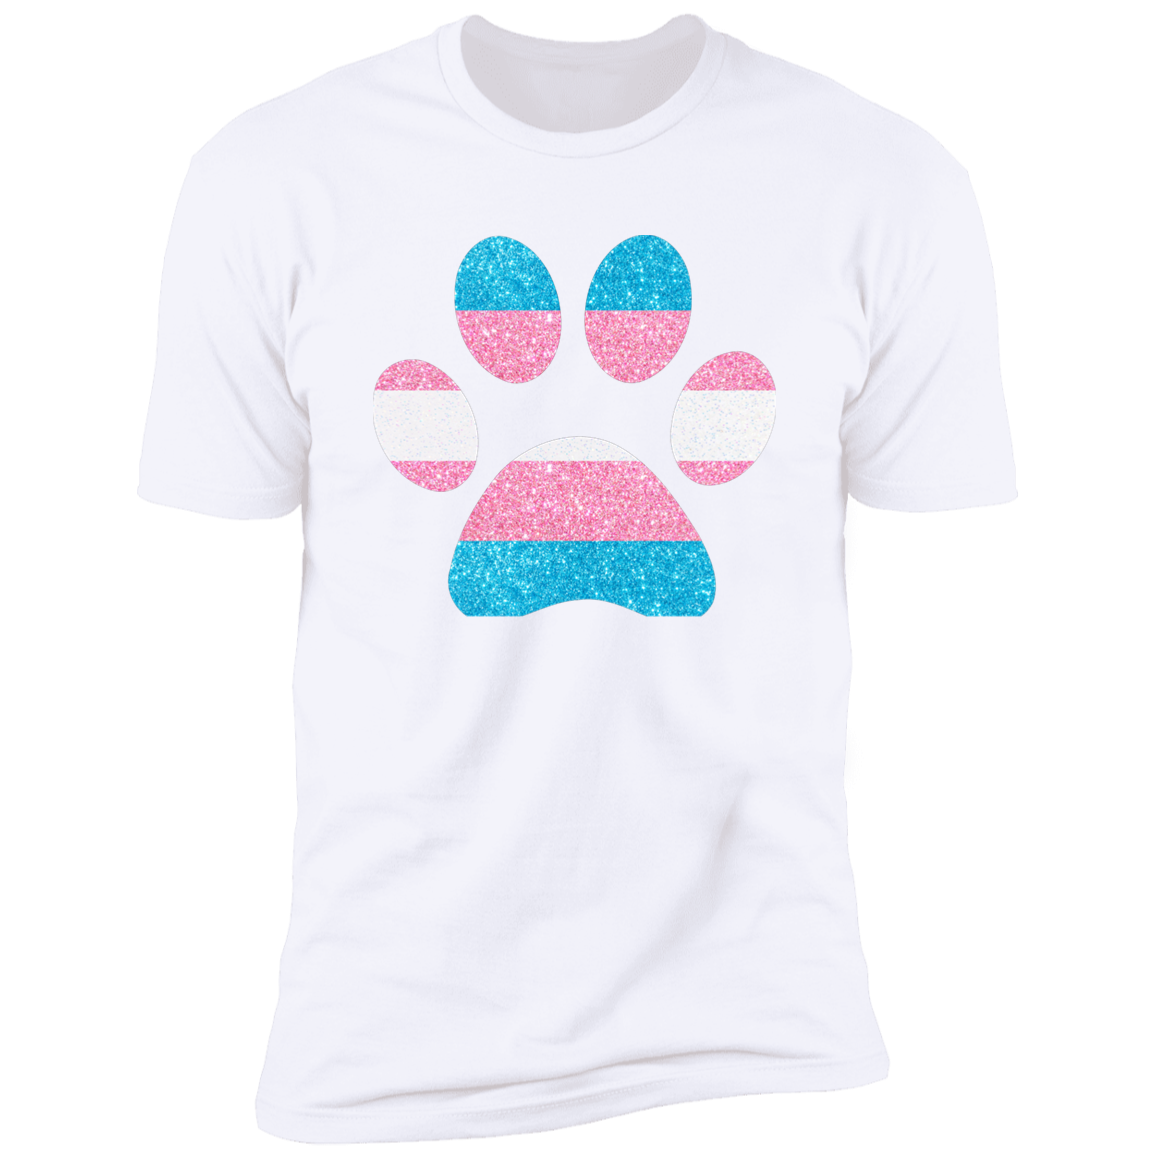 Dog Paw Trans Pride t-shirt, dog trans pride dog shirt for humans, in white